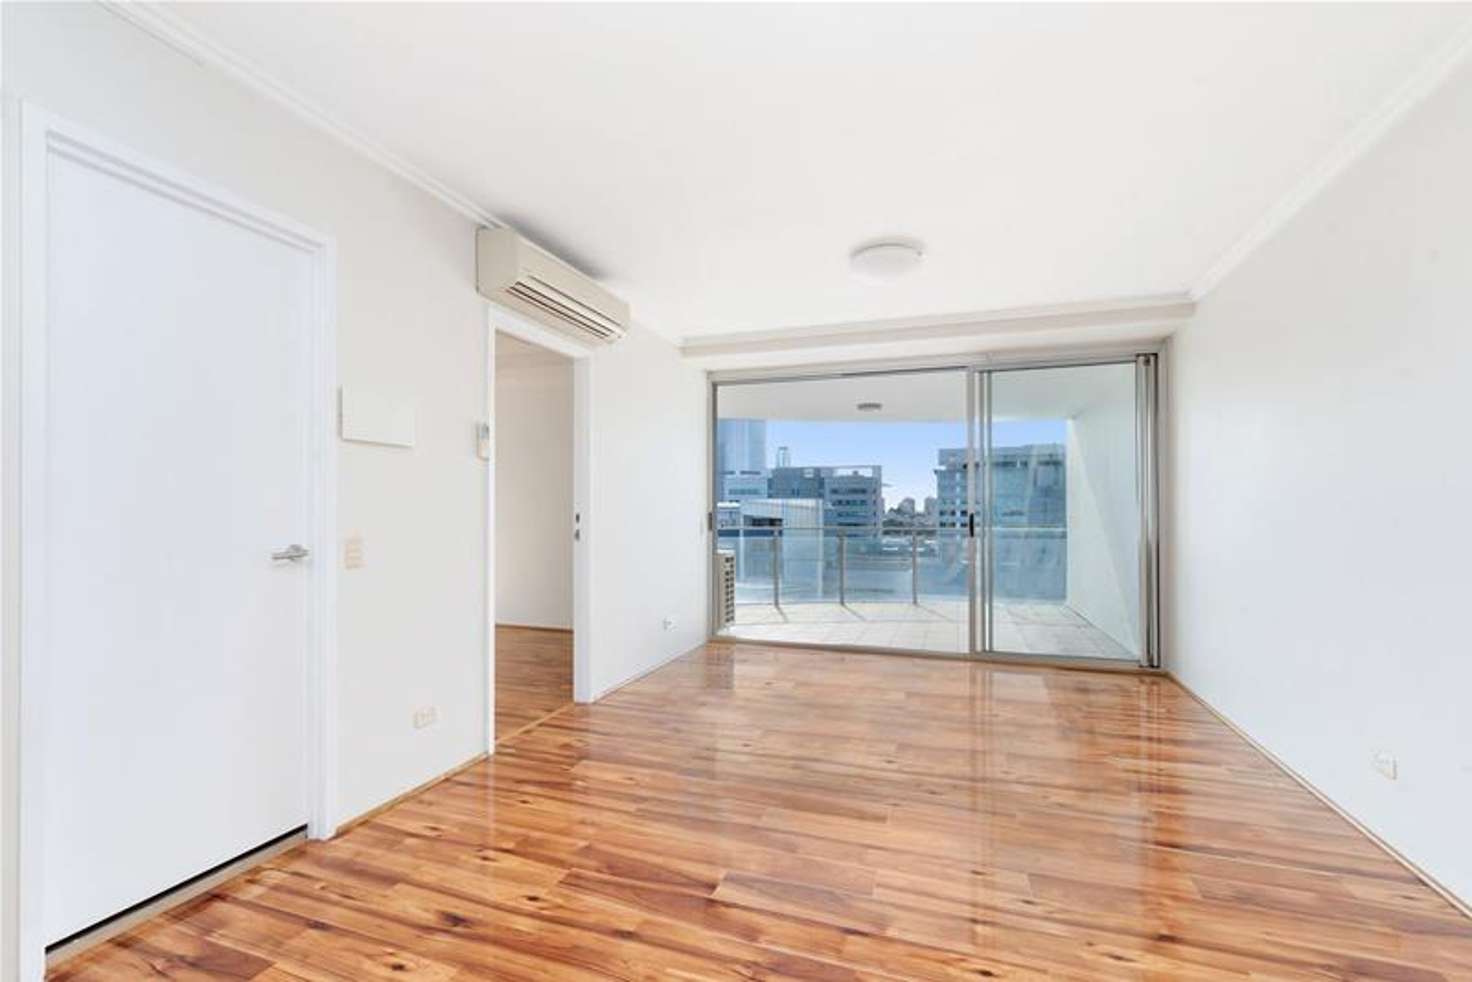 Main view of Homely apartment listing, 091/62 Cordelia Street, South Brisbane QLD 4101